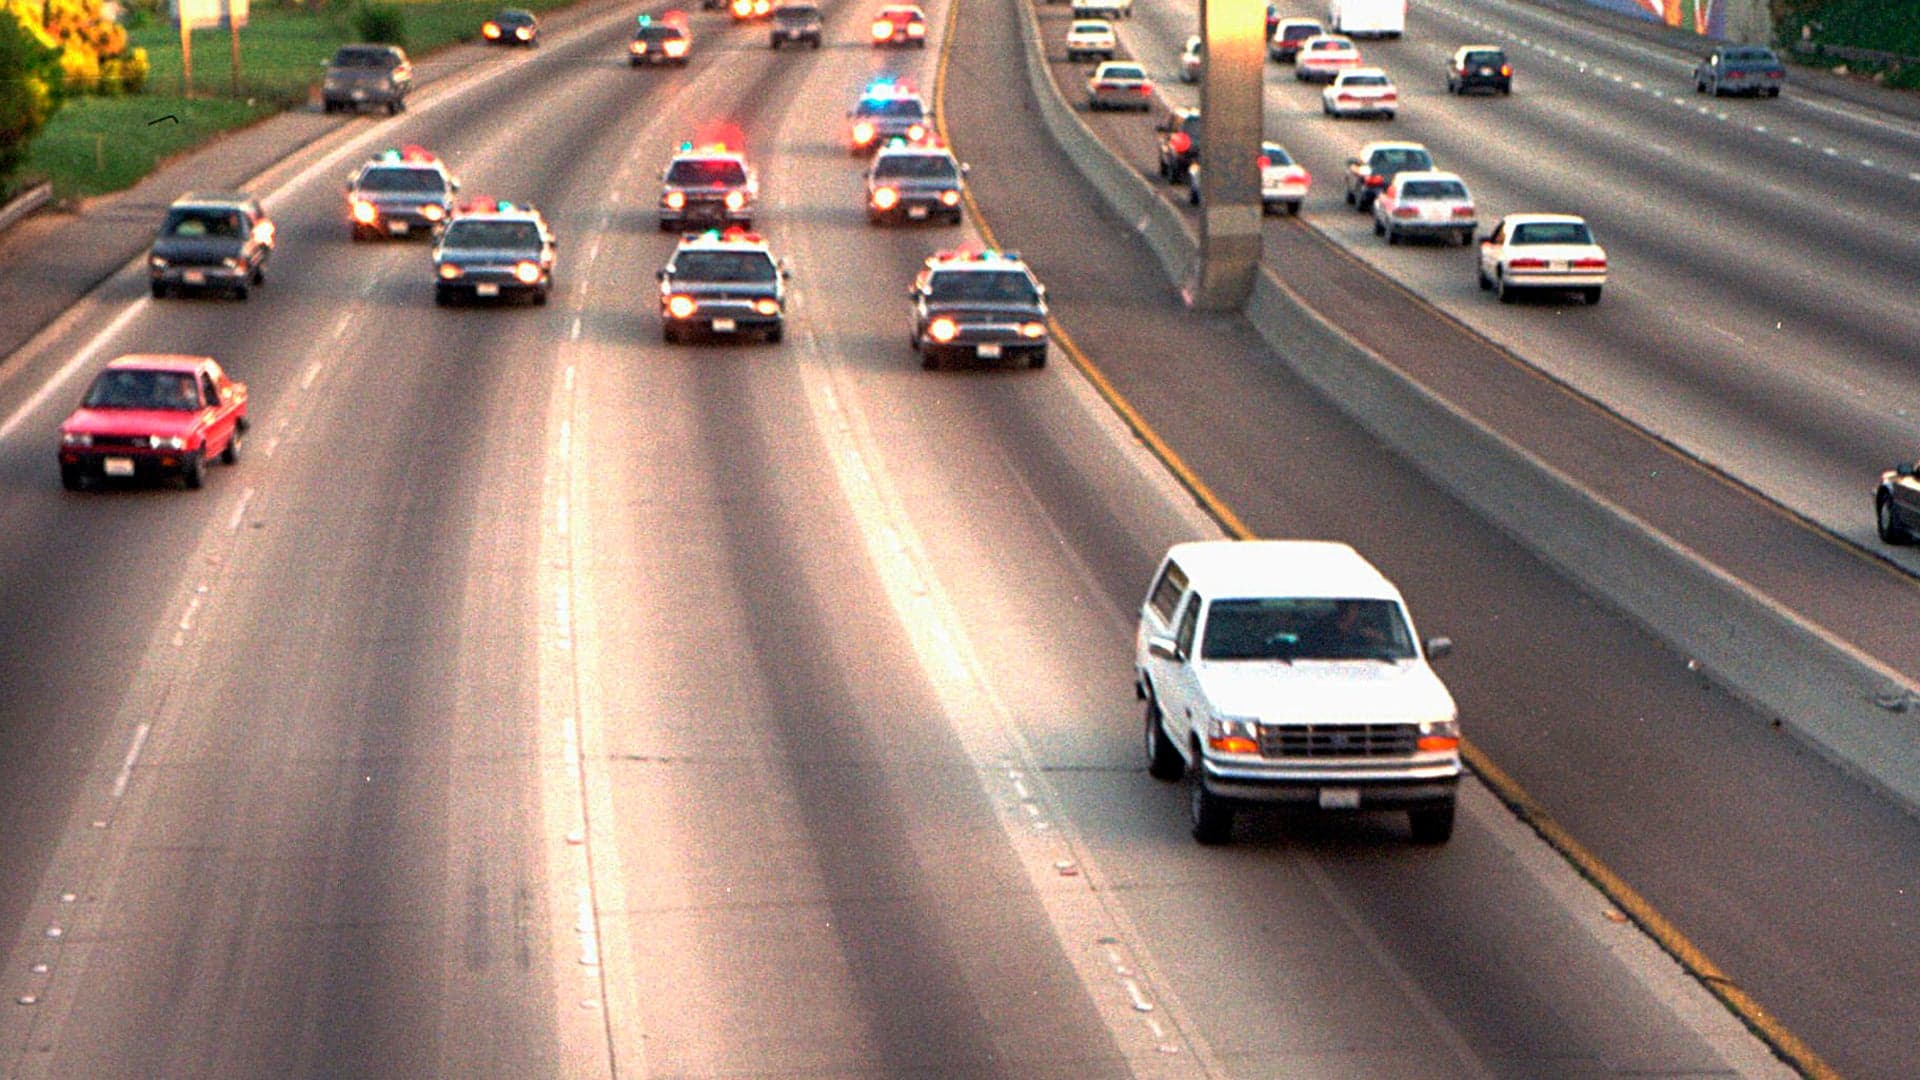 Owner of Ford Bronco Used in O.J. Simpson Chase Hopes to Sell It for $750,000